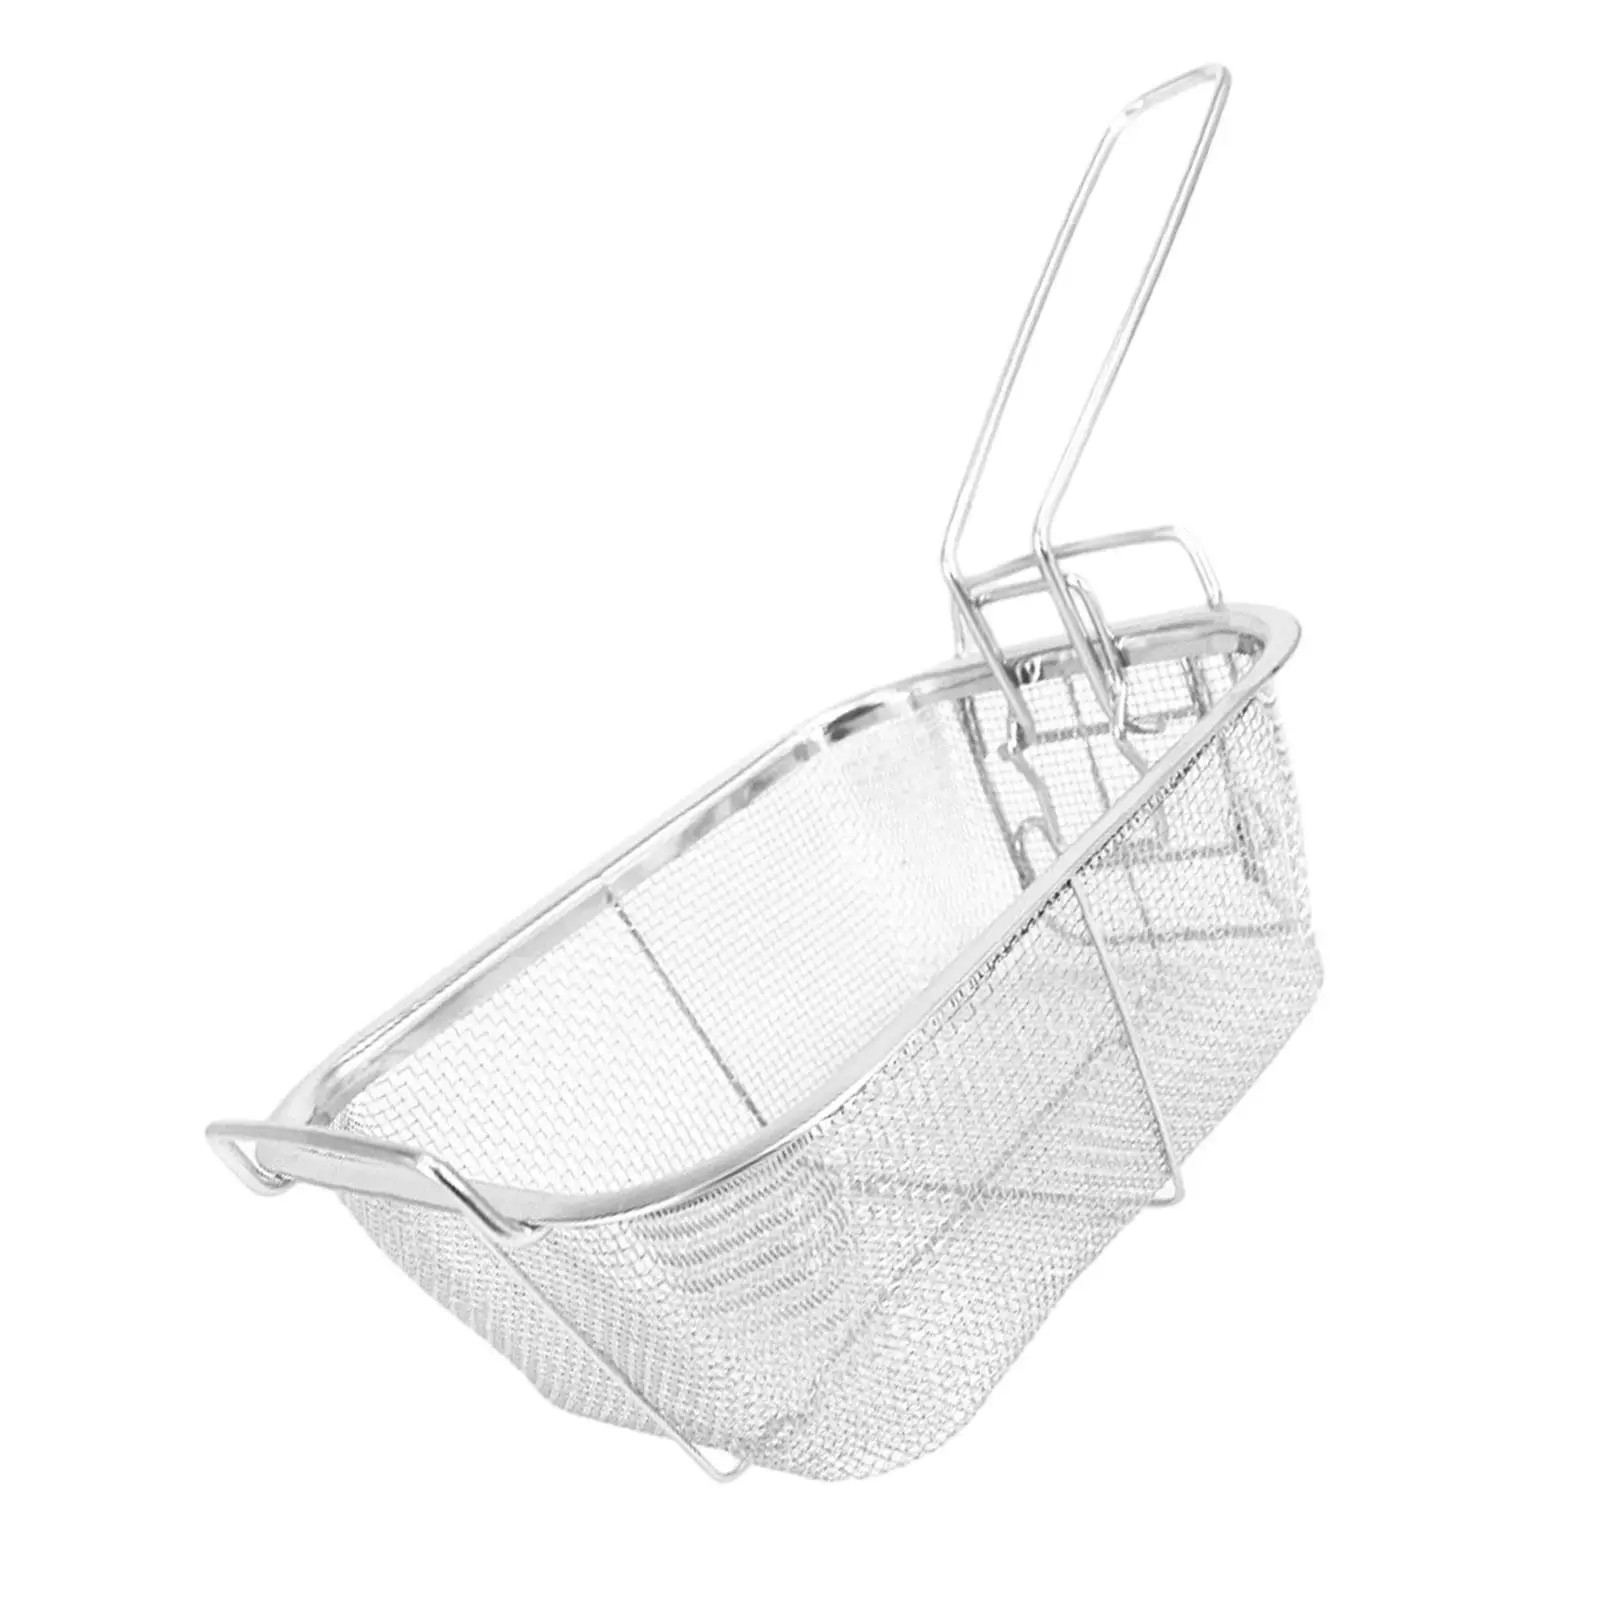 Square Fryer Basket Cooking Tool French Fries Holder Mesh French Fry Chips Basket for Kitchen Restaurant Potatoes Barbecue Cafe